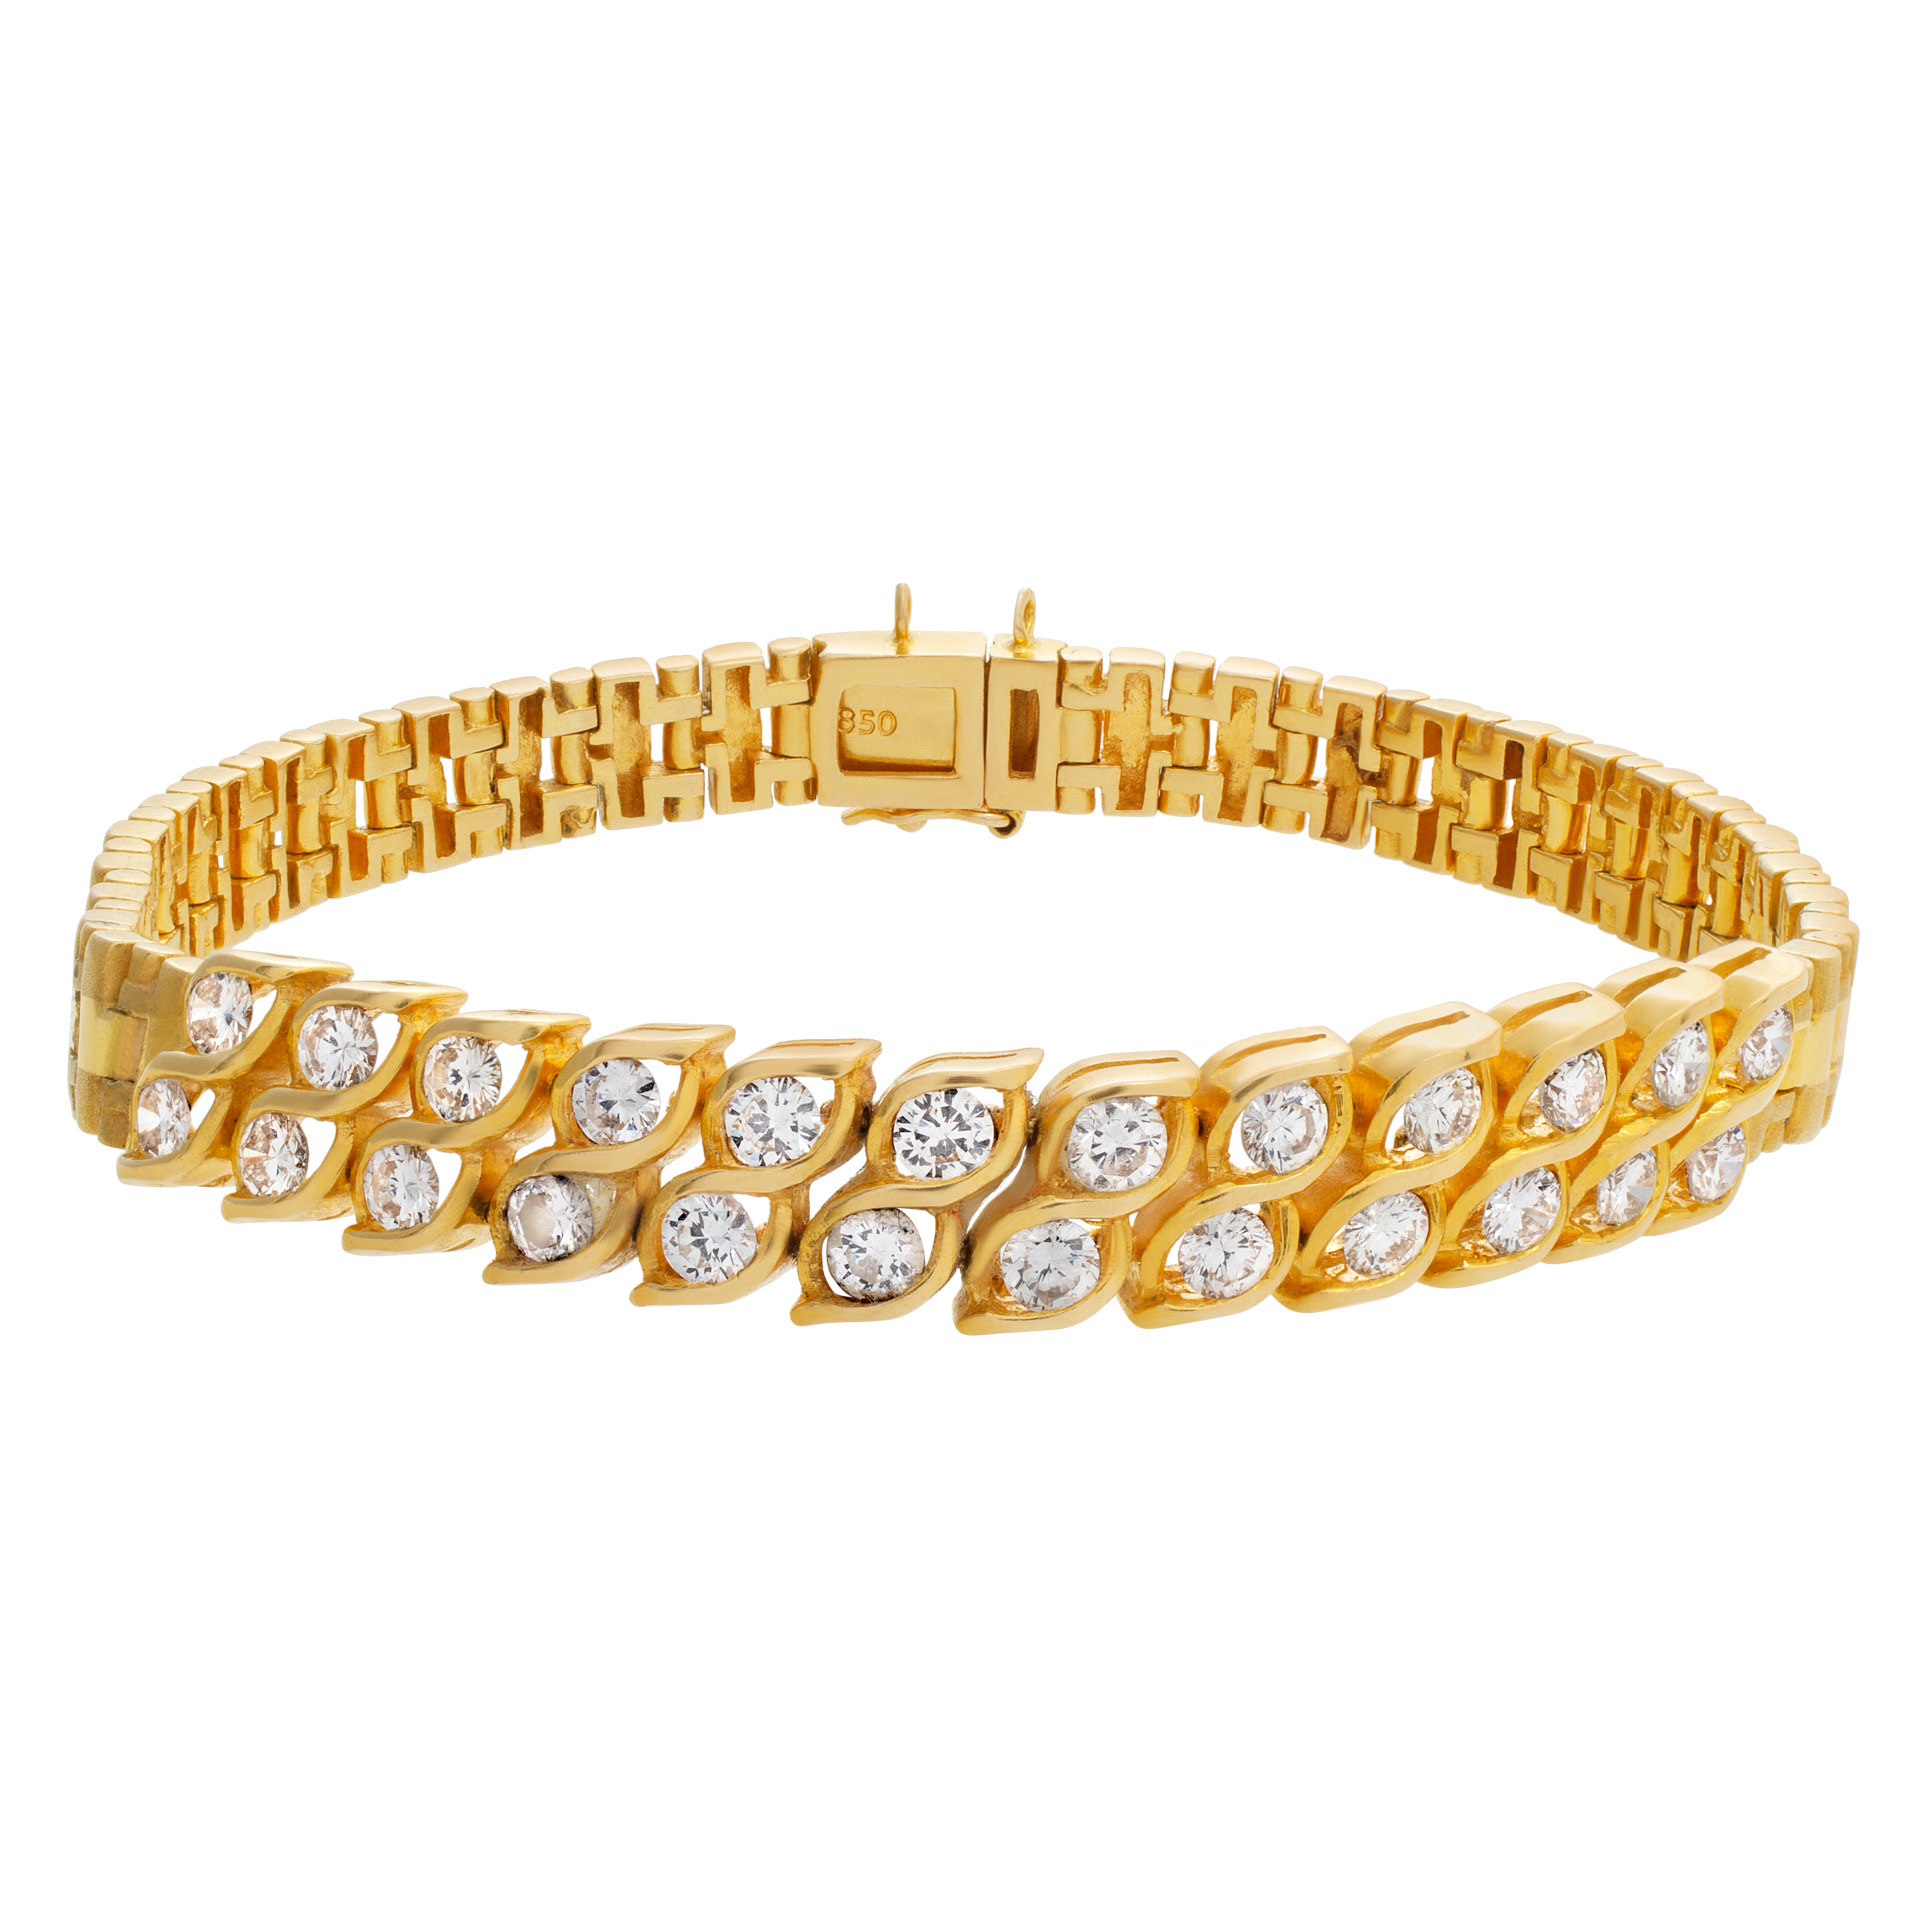 Diamond bracelet in 18k yellow gold with over 1.25 carats in G-H color, VS clarity diamonds